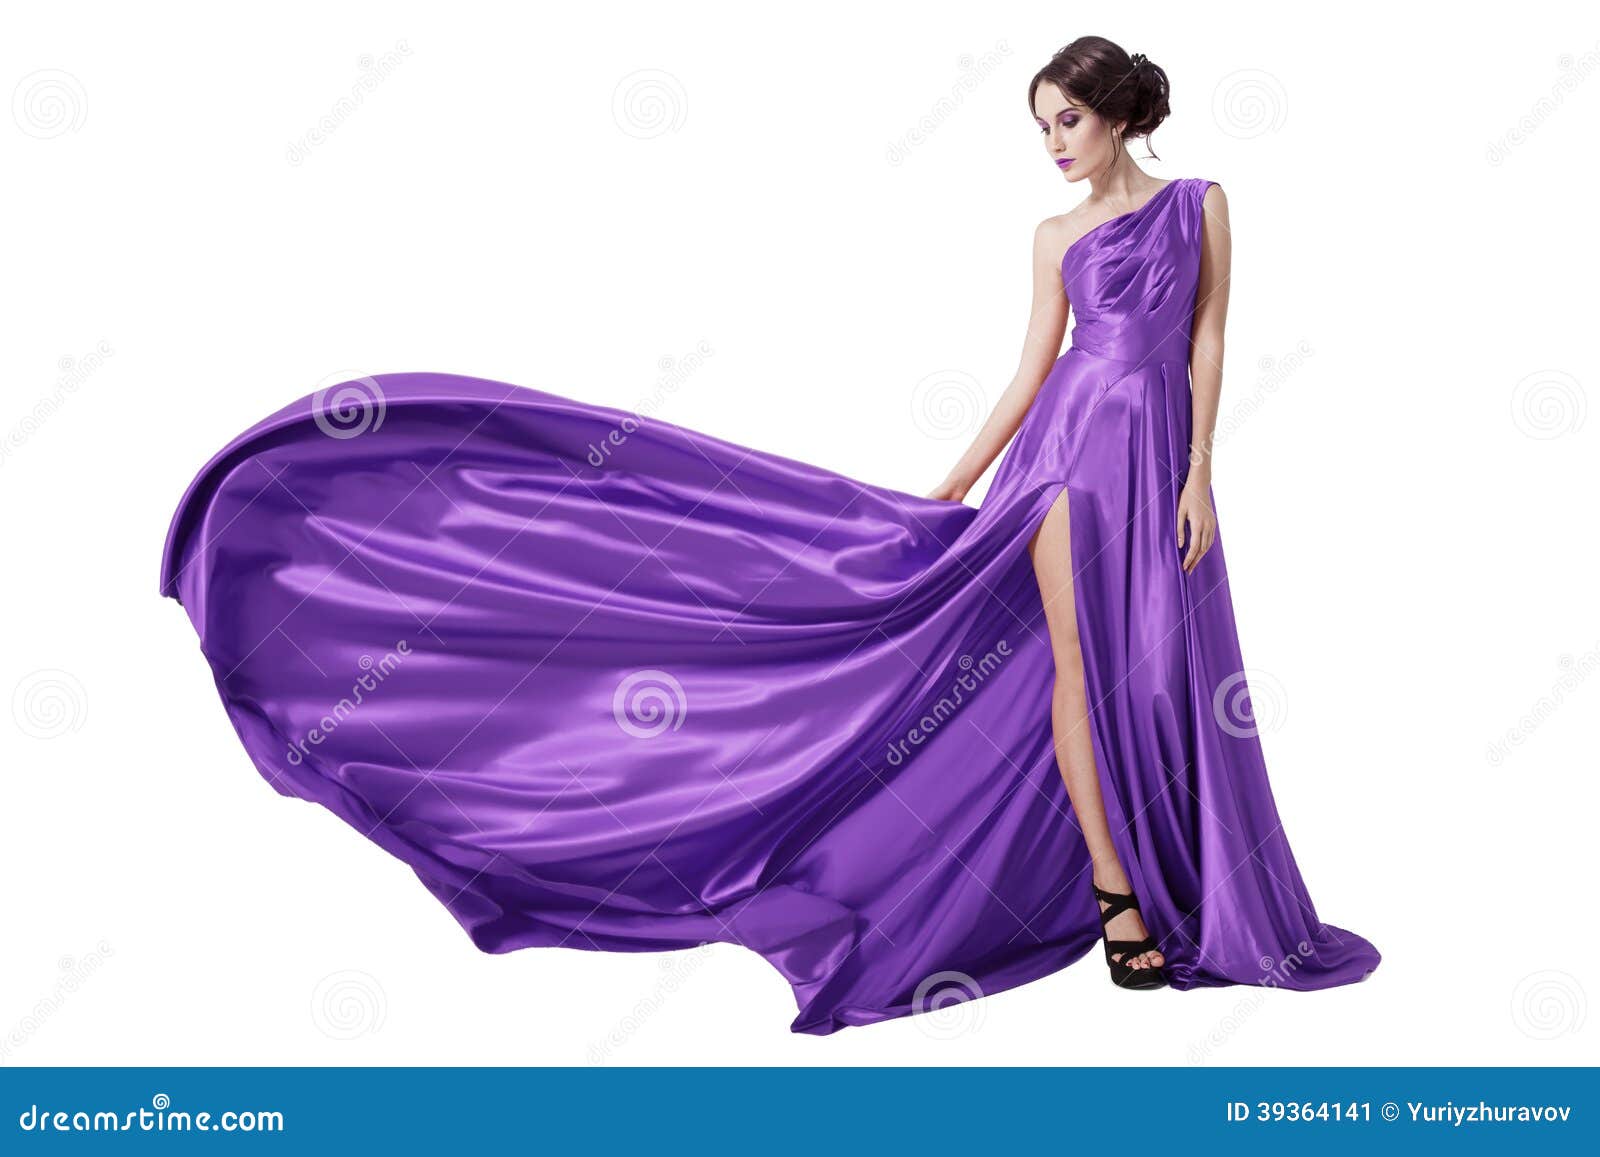 young beauty woman in fluttering violet dress. 